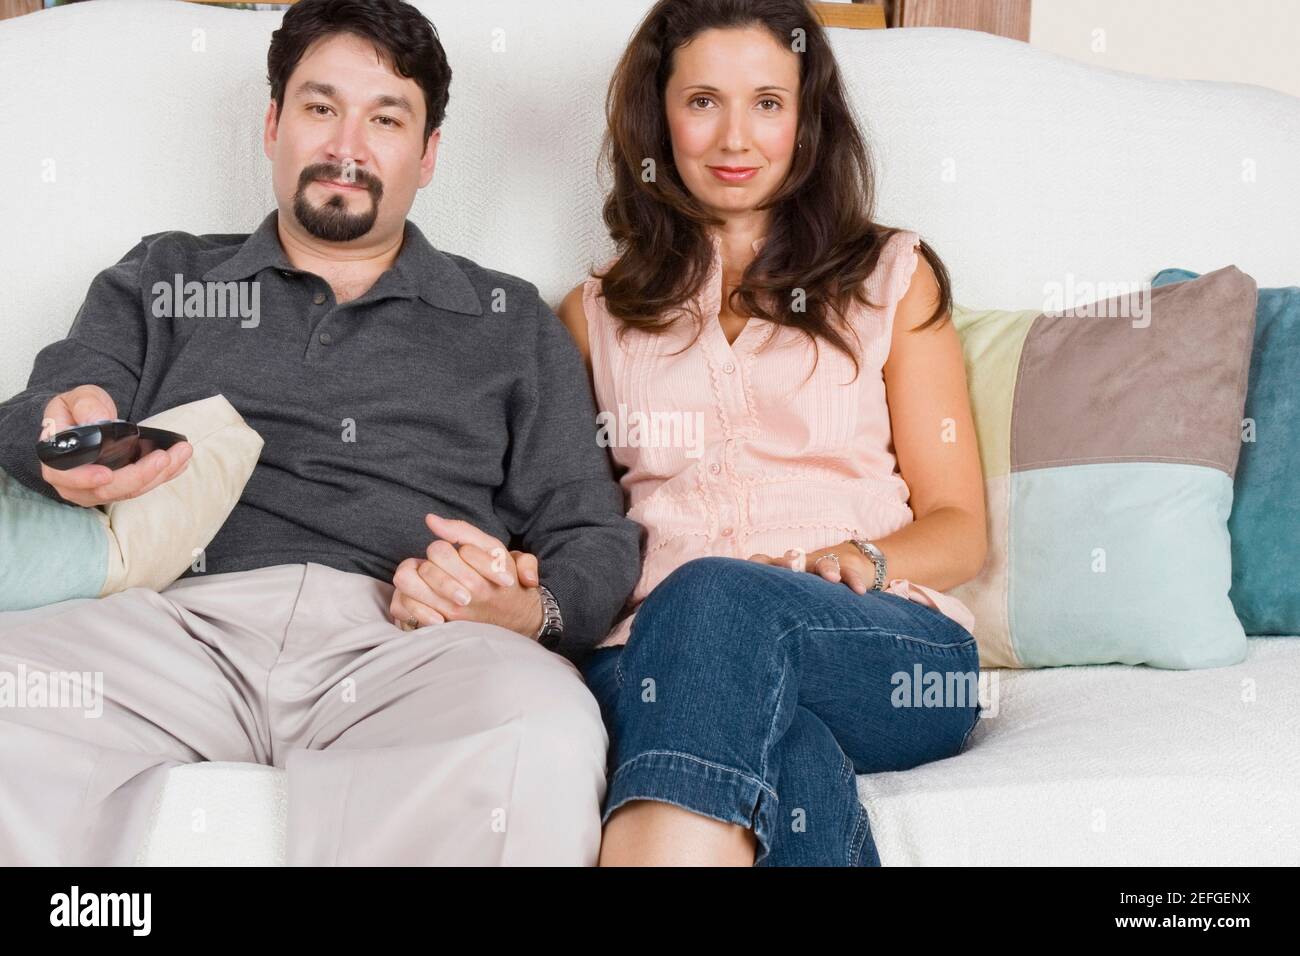 Portrait of a mid adult couple watching television Stock Photo